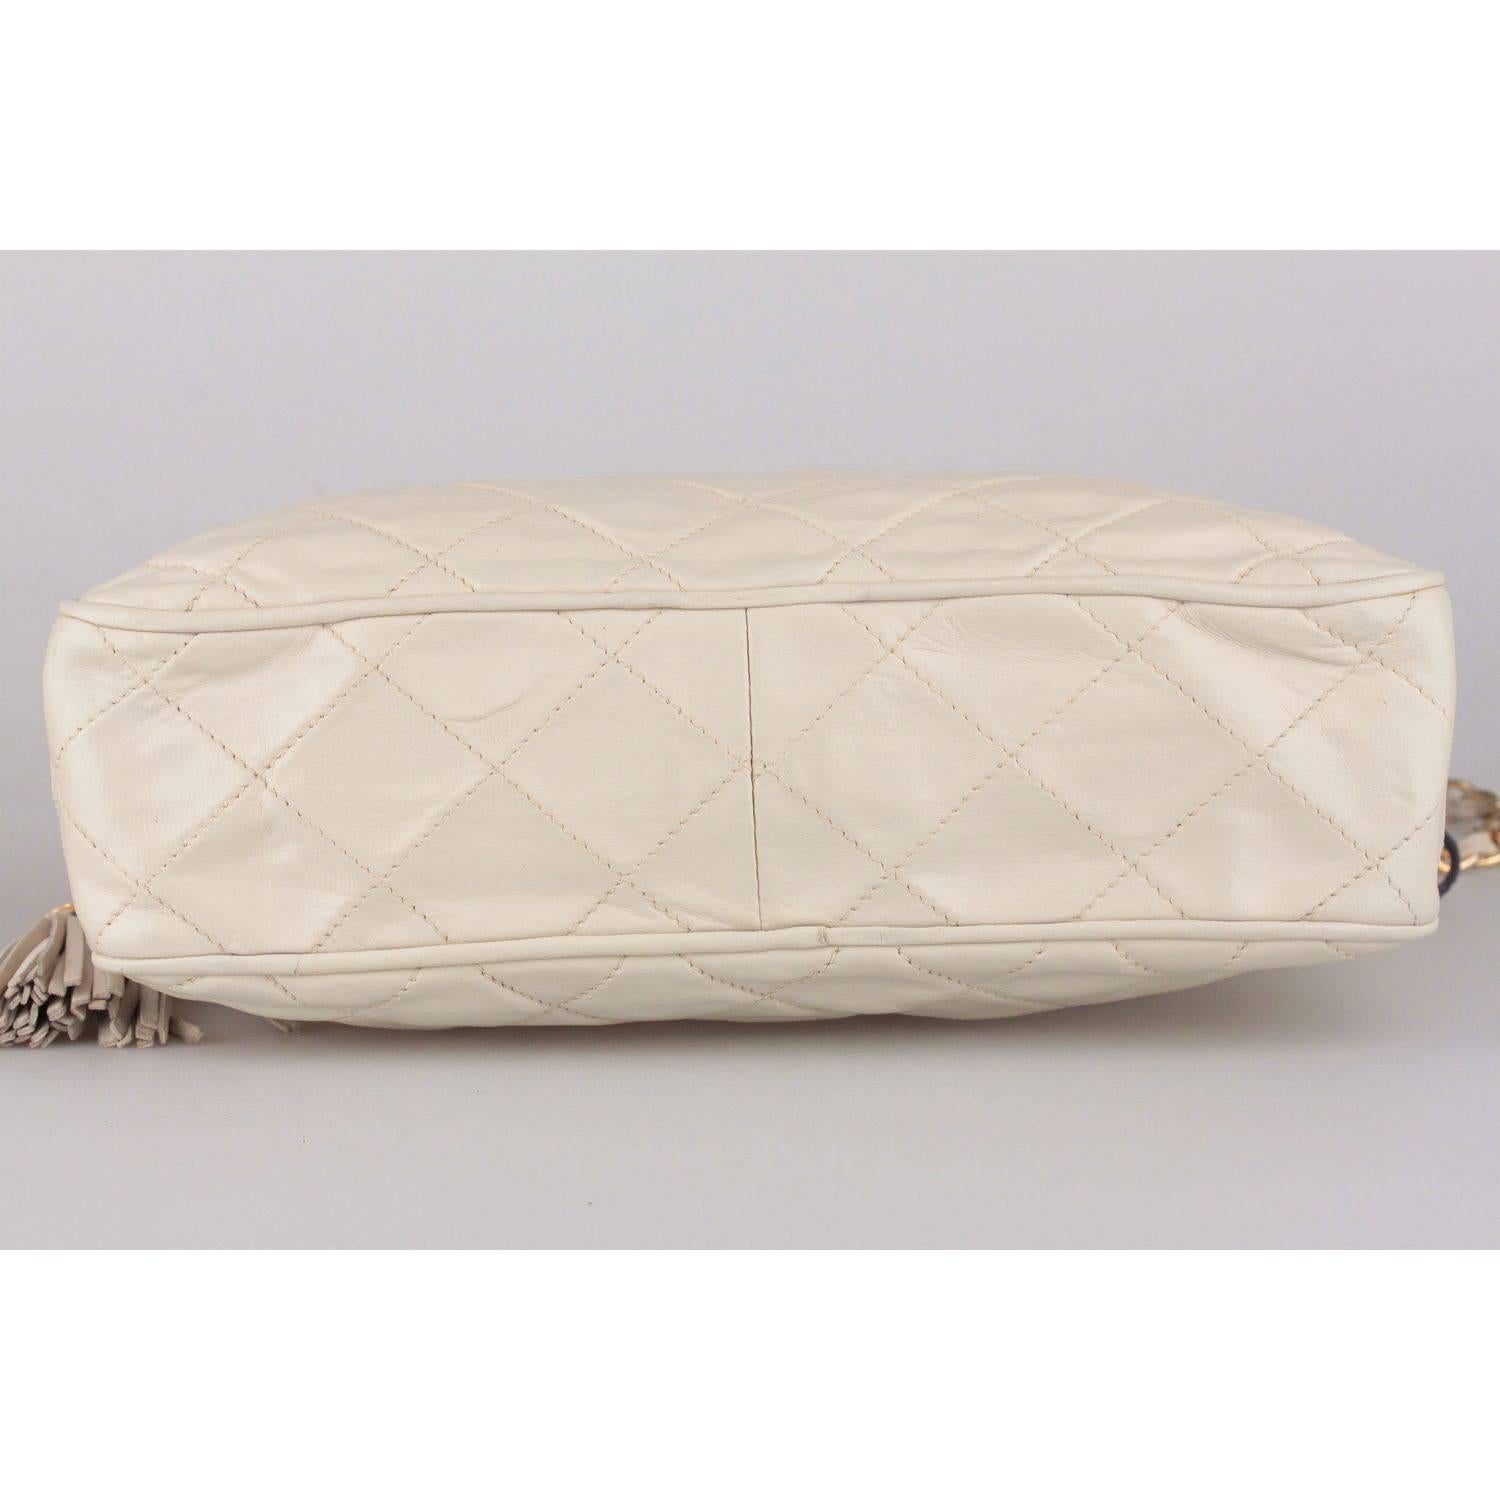 CHANEL Vintage Ivory QUILTED Leather CC Stitch CAMERA BAG w/ Tassel 1